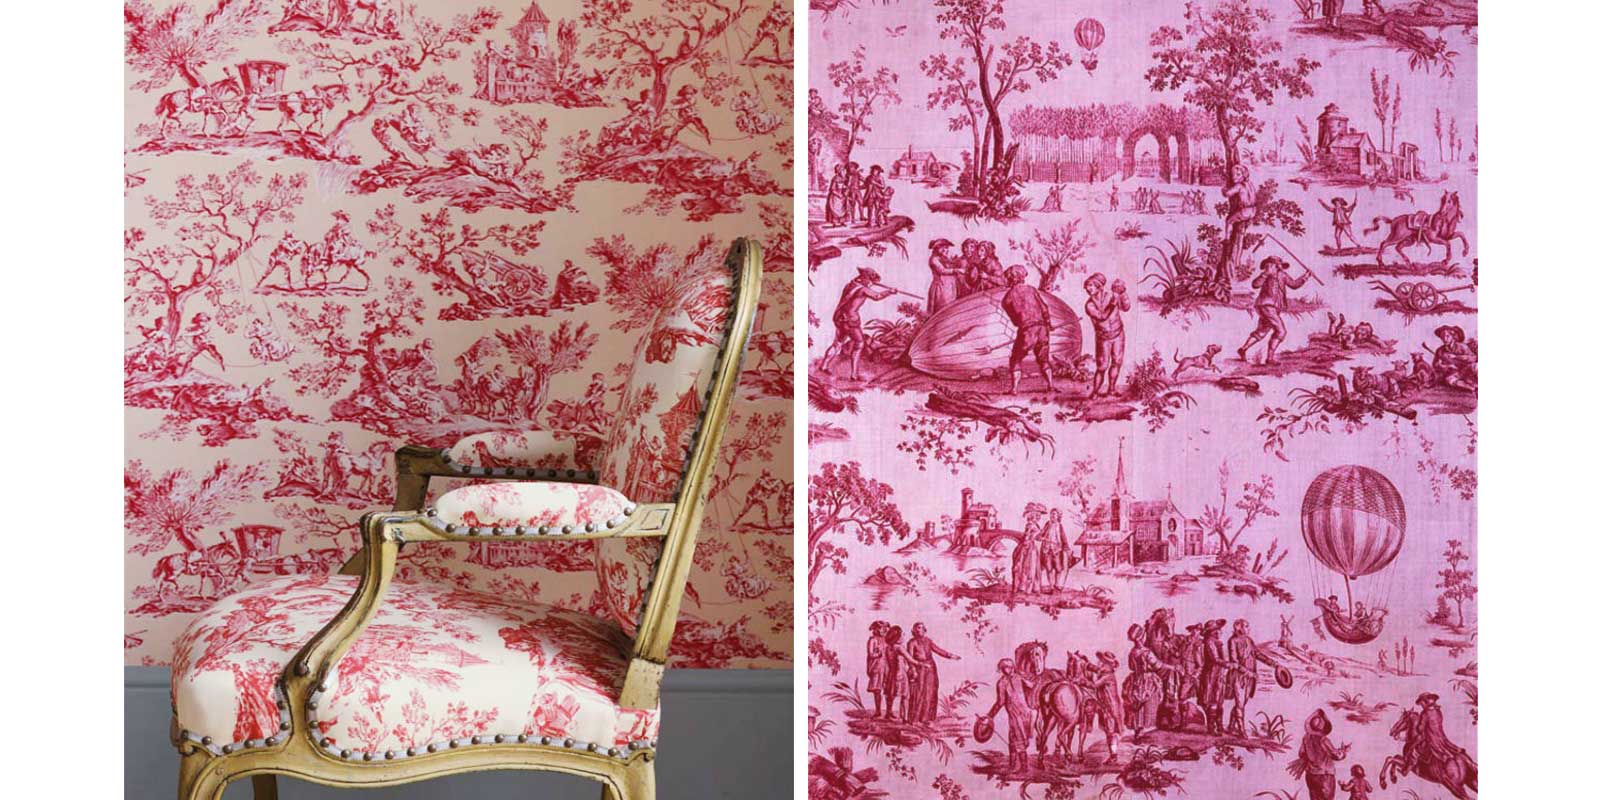 TOILE DE JOUY : FRENCH BY DESIGN